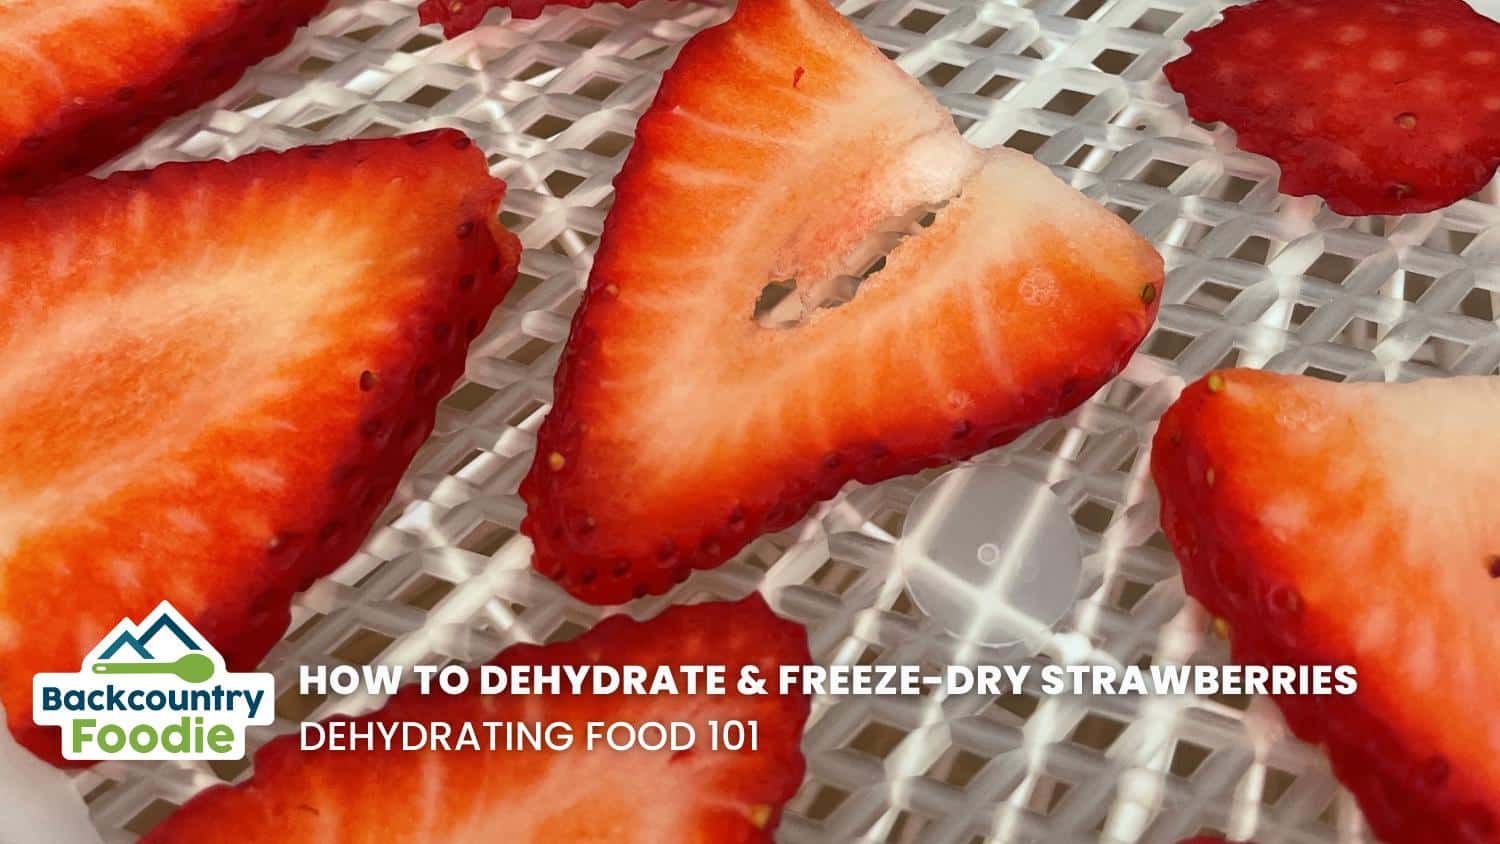 Backcountry Foodie Blog How to Dehydrate and Freeze Dry Strawberries for Backpacking Meals Dehydrating Food 101 thumbnail image